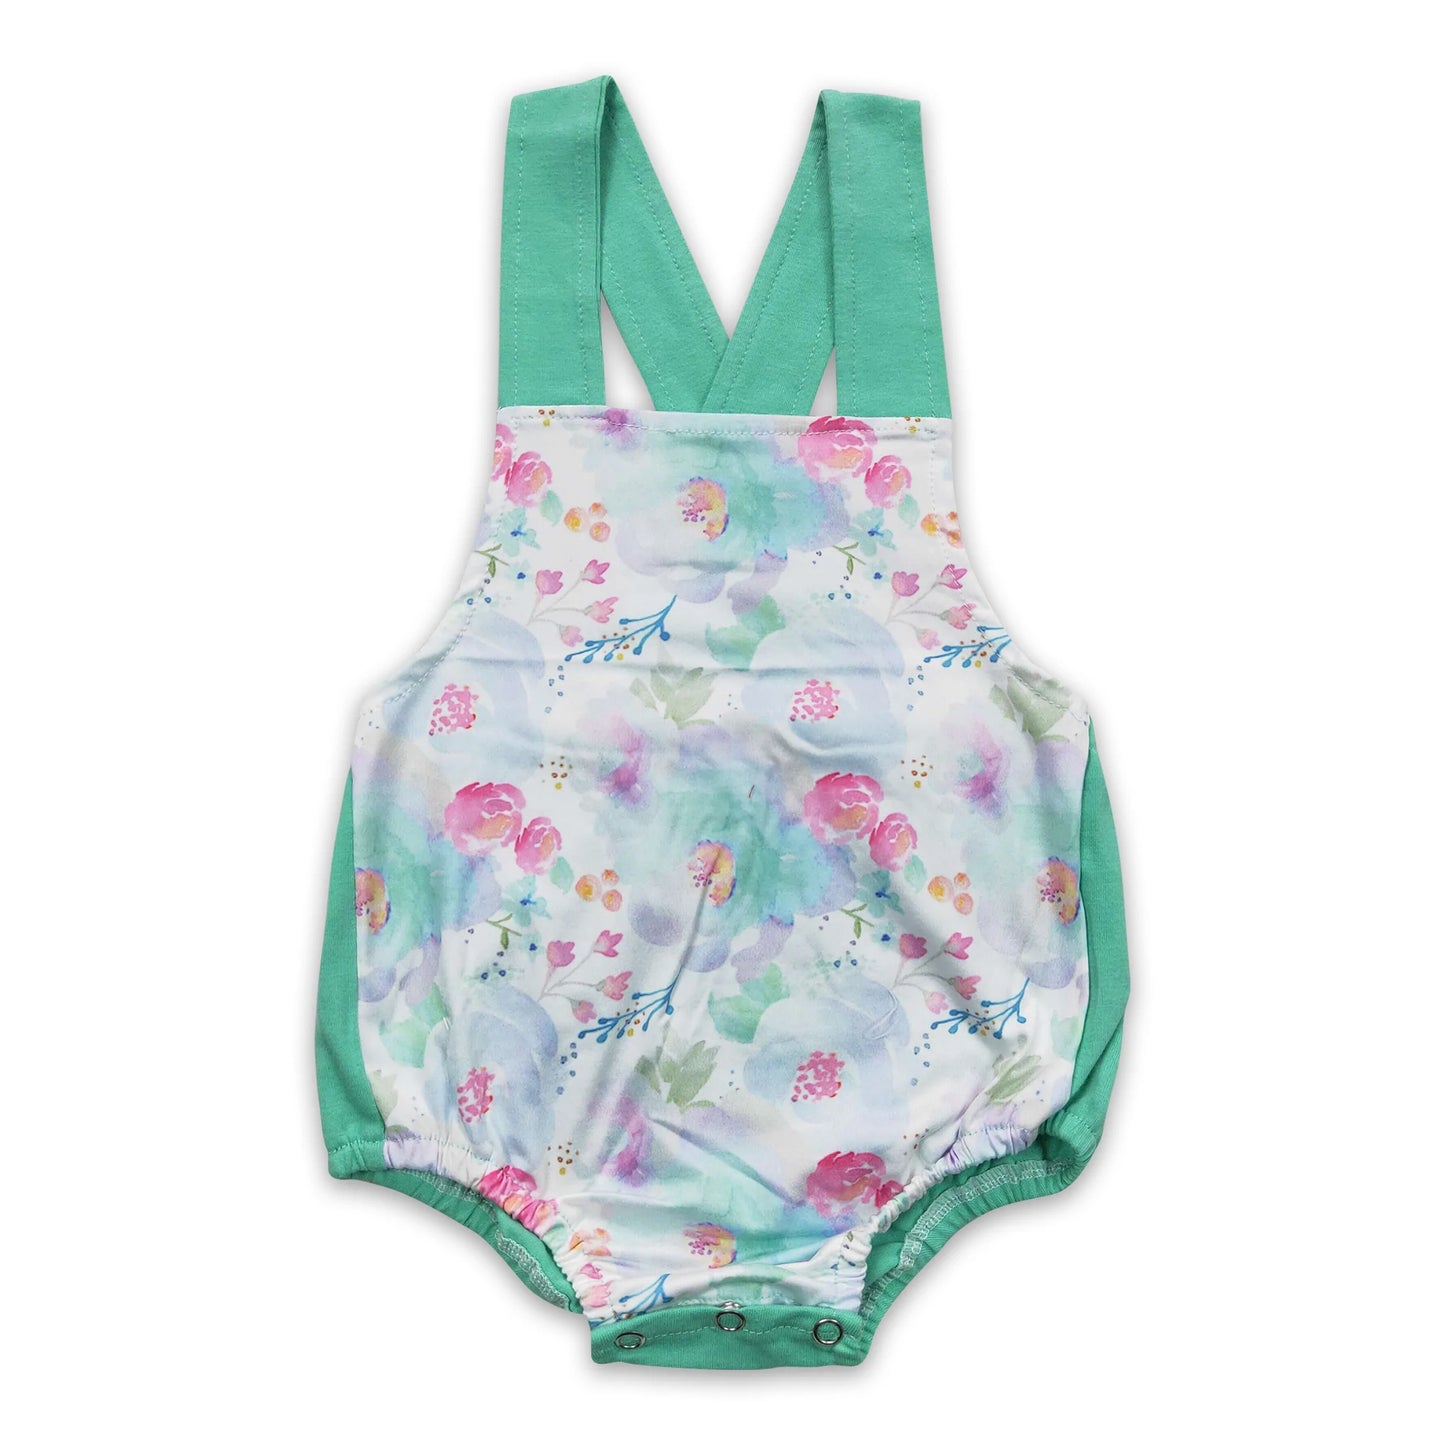 Mint floral sleeveless backless baby girls romper